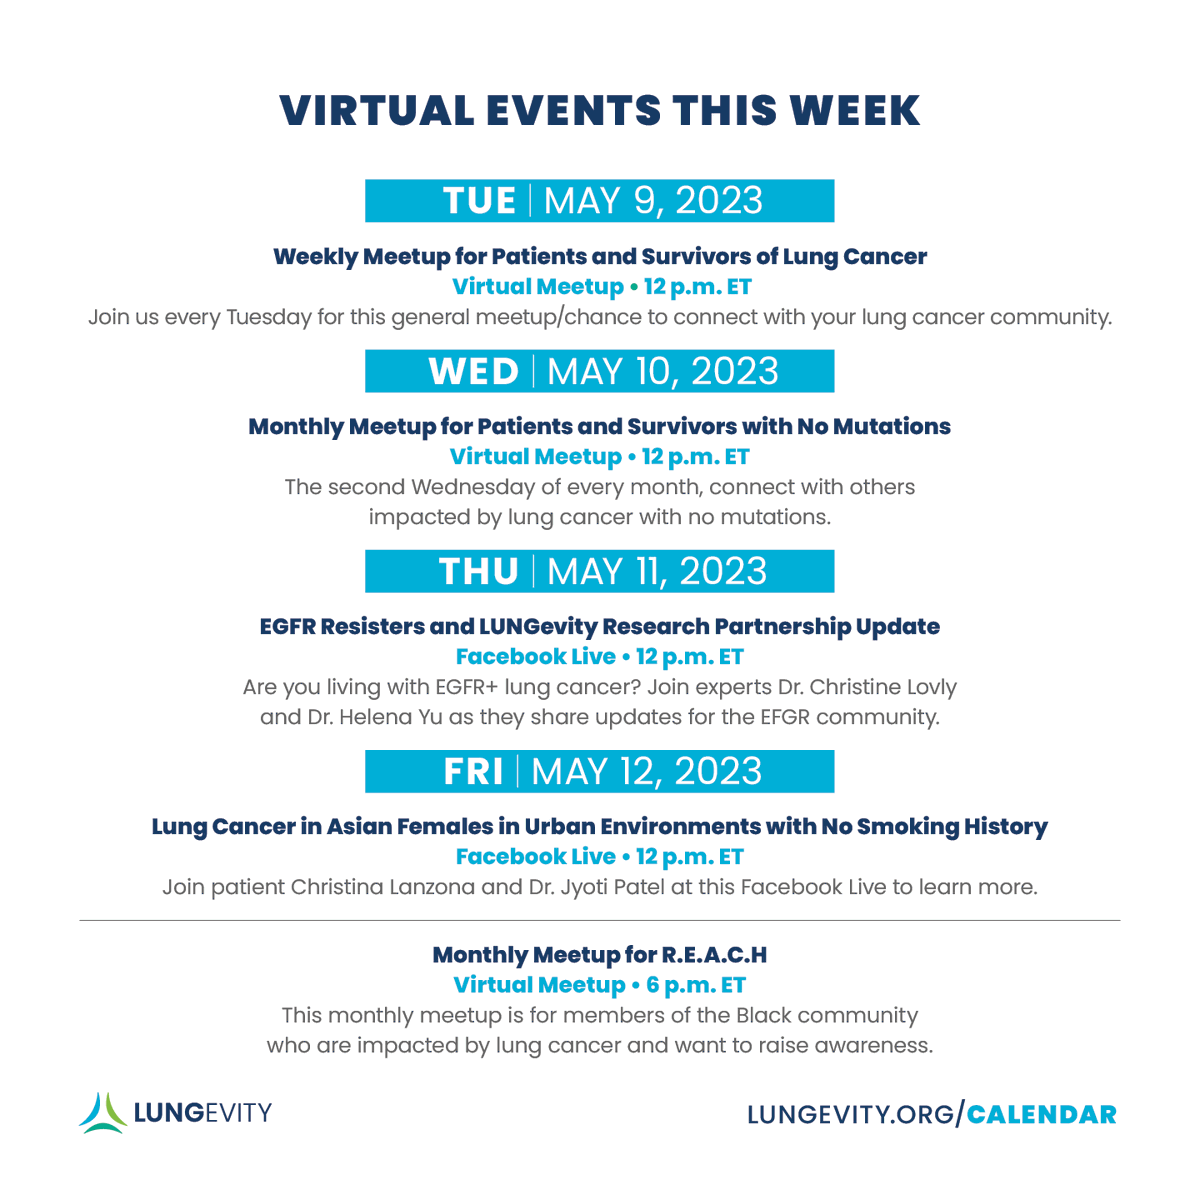 We might still be recovering from a fantastic HOPE Summit weekend, but our virtual events schedule is nonstop this week! Sign up for free at lungevity.org/calendar #lcsm #lungcancer #Livingwithlungcancer